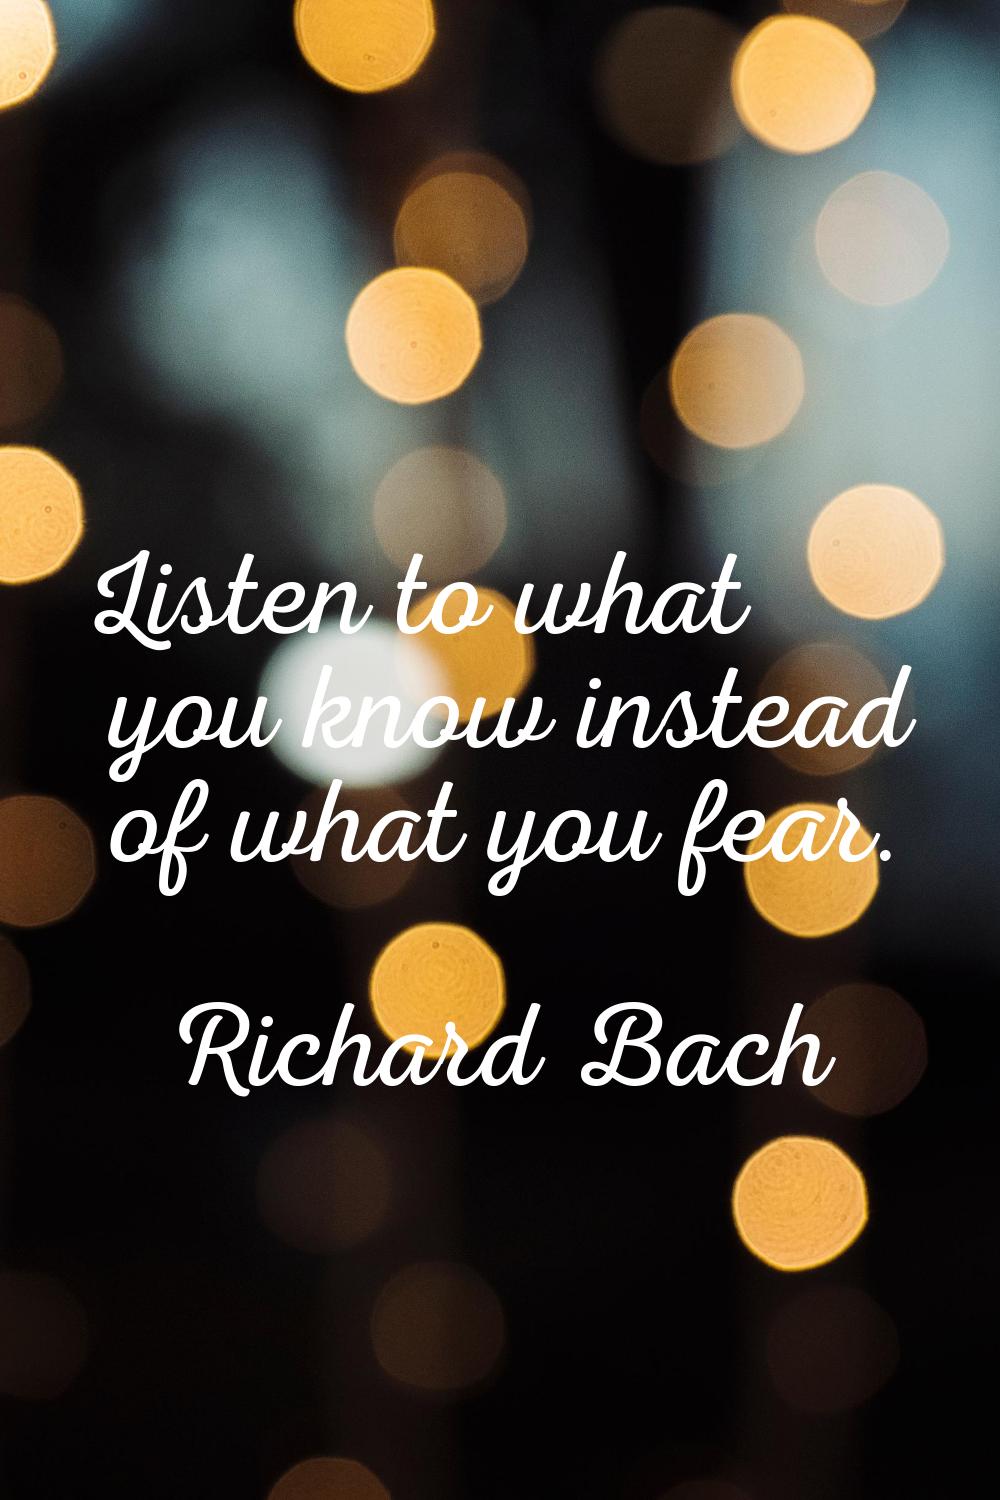 Listen to what you know instead of what you fear.